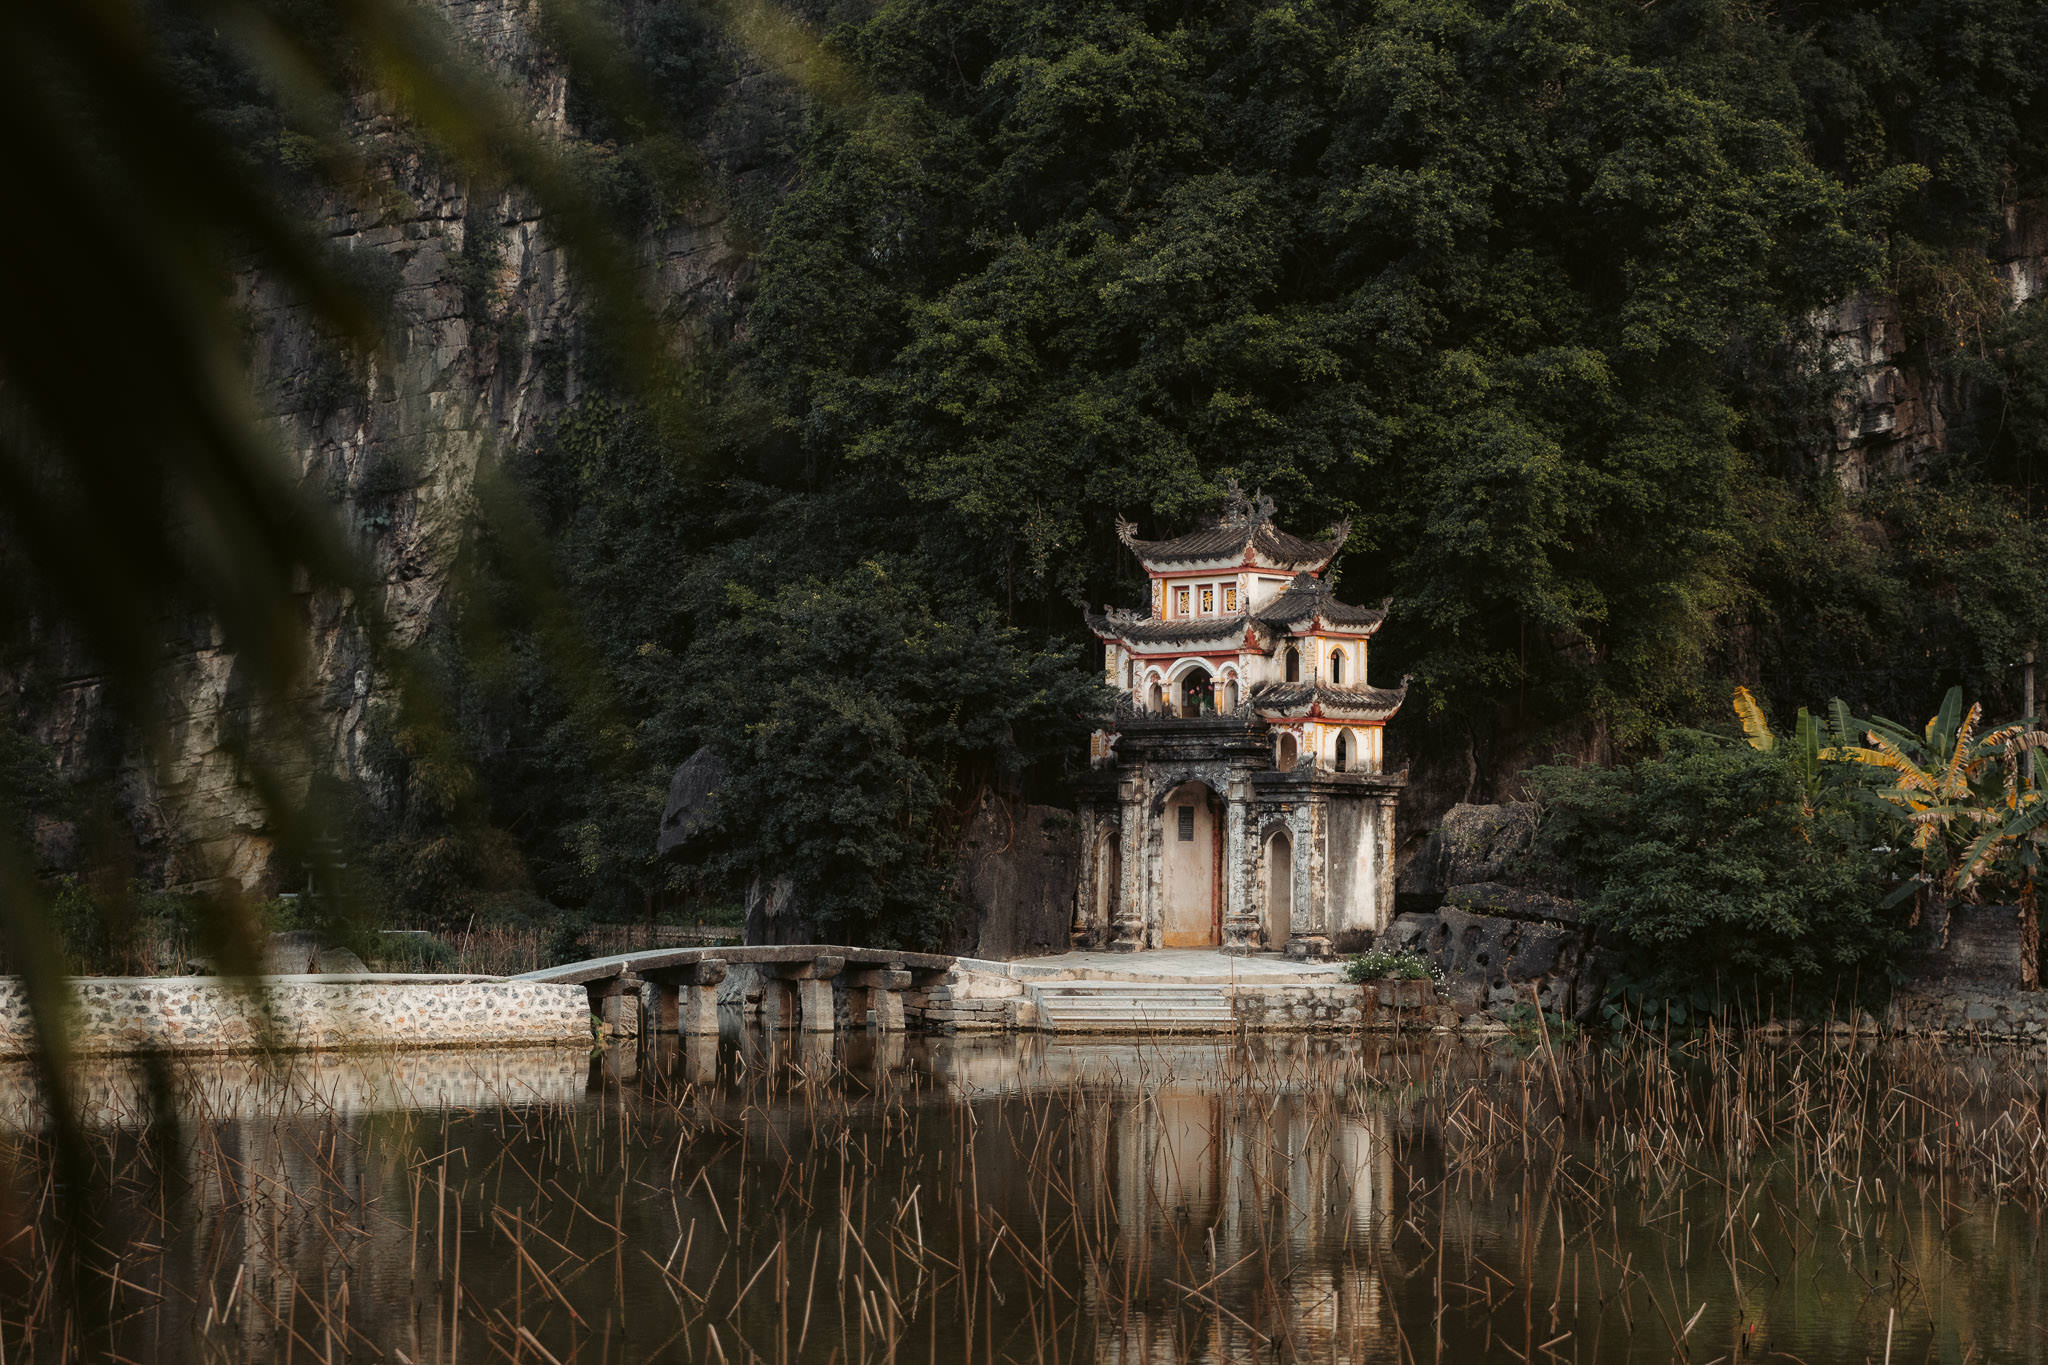 The ultimate travel guide for visiting Ninh Binh in North Vietnam